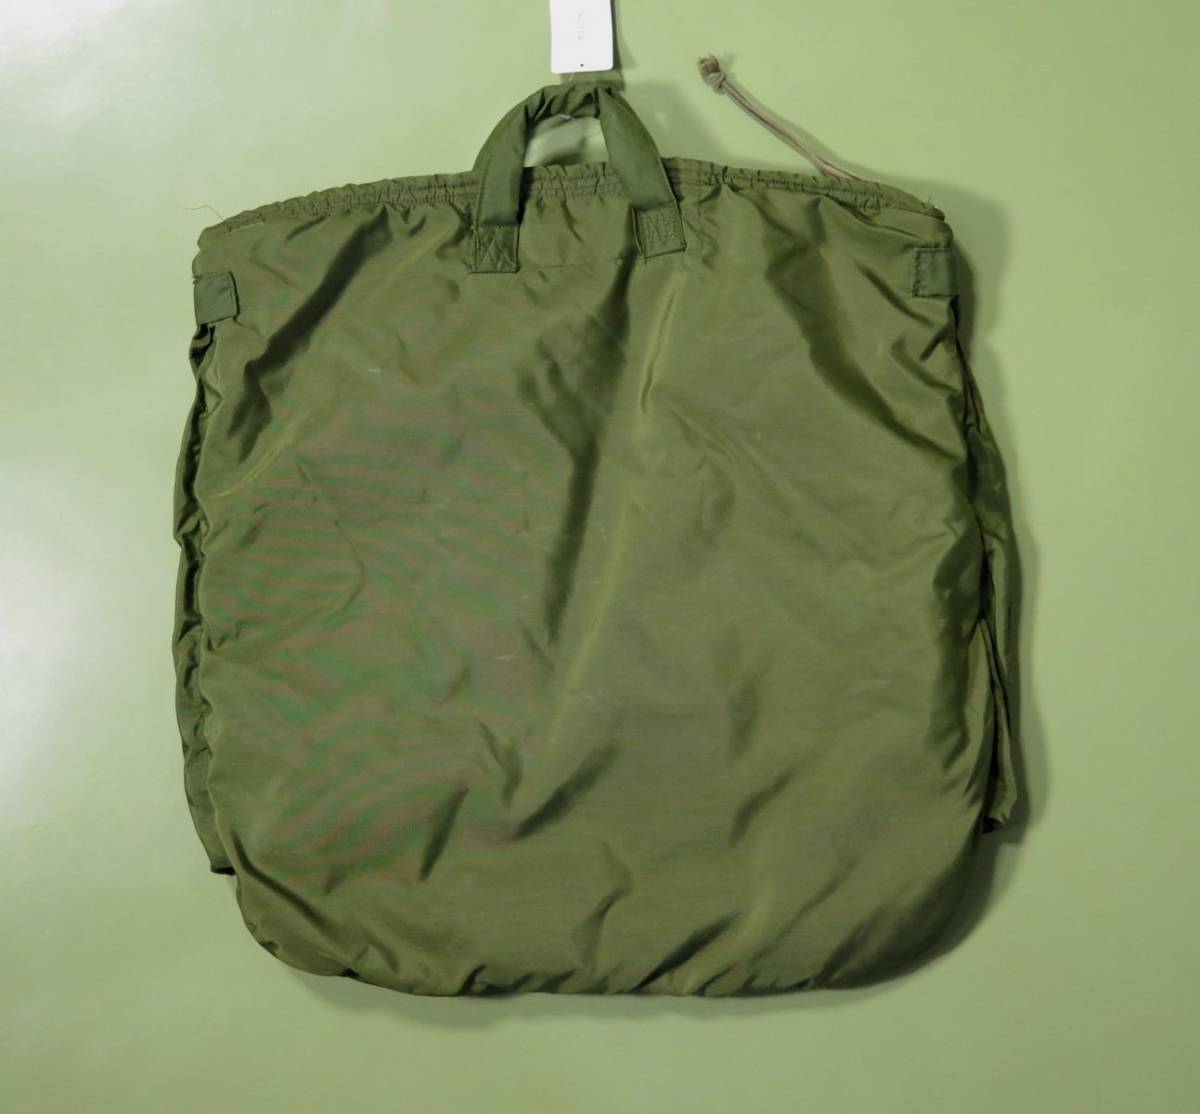  the US armed forces the truth thing helmet bag 1970 year made camouflage lining 